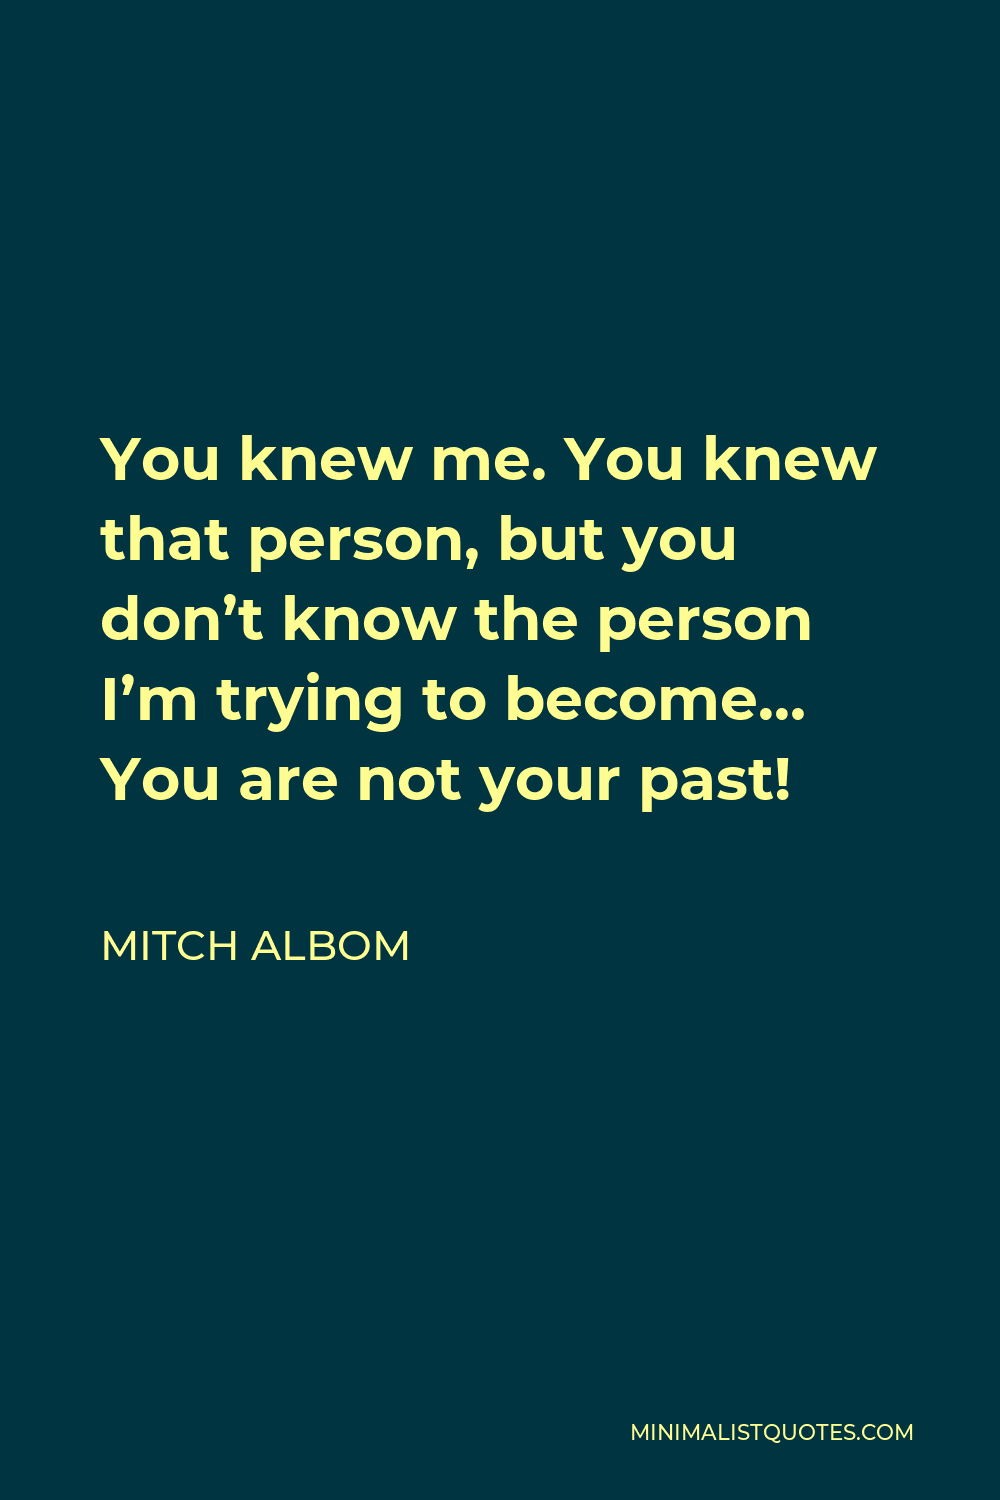 Mitch Albom Quote - You knew me. You knew that person, but you don’t know the person I’m trying to become… You are not your past!